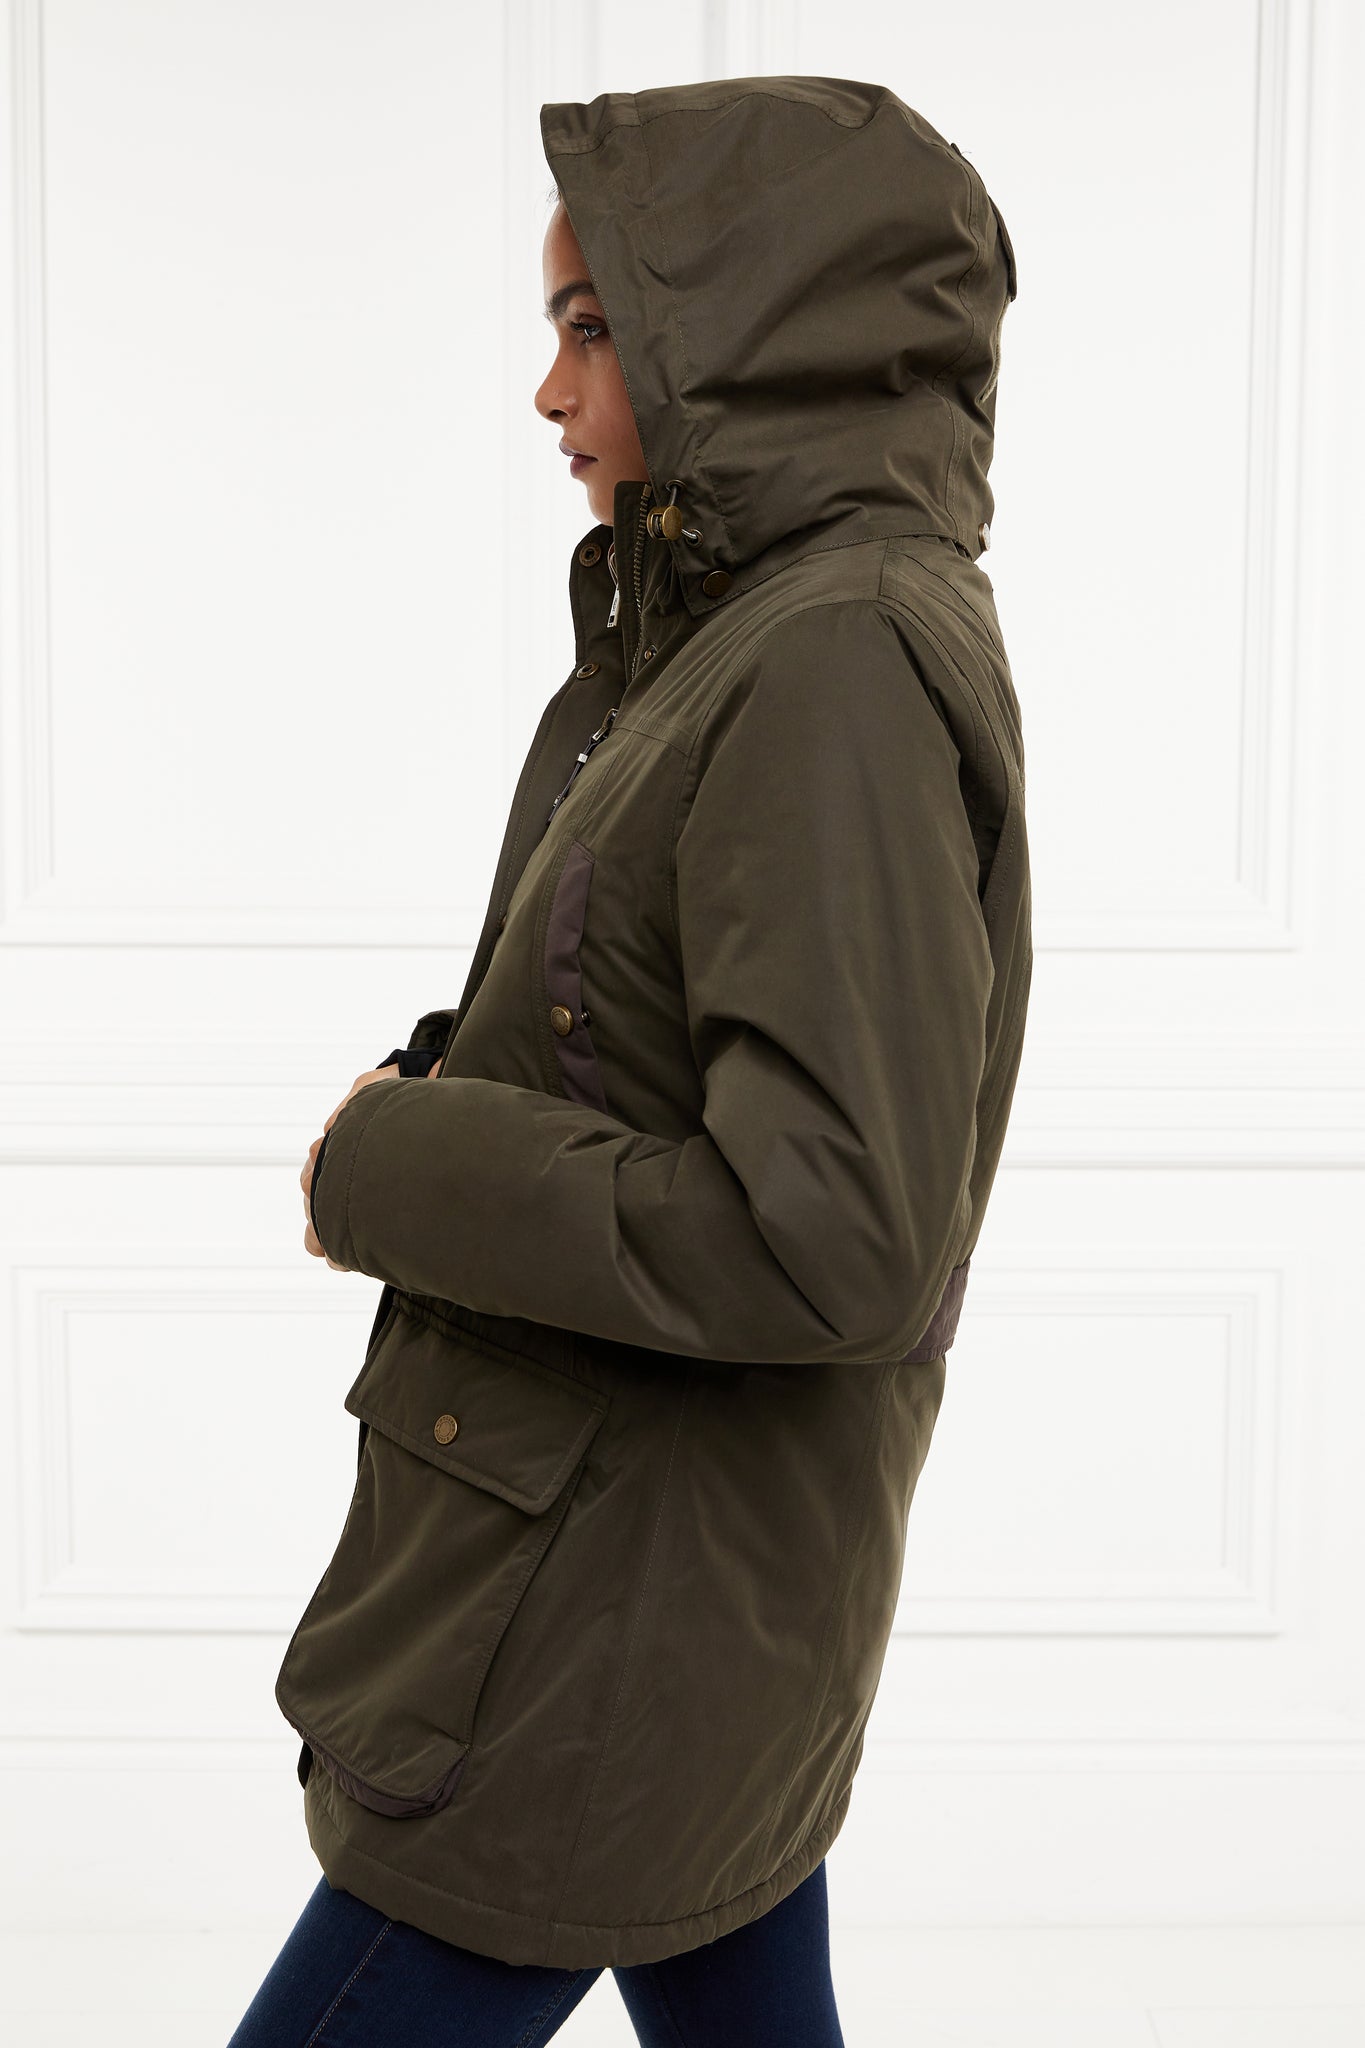 side of multiway coat in khaki that works as a 3 in 1 a waterproof outer coat with stowaway hood and deep pockets and black jersey storm cuffs and a fleece gilet inner with tan leather trims can be worn together or separately